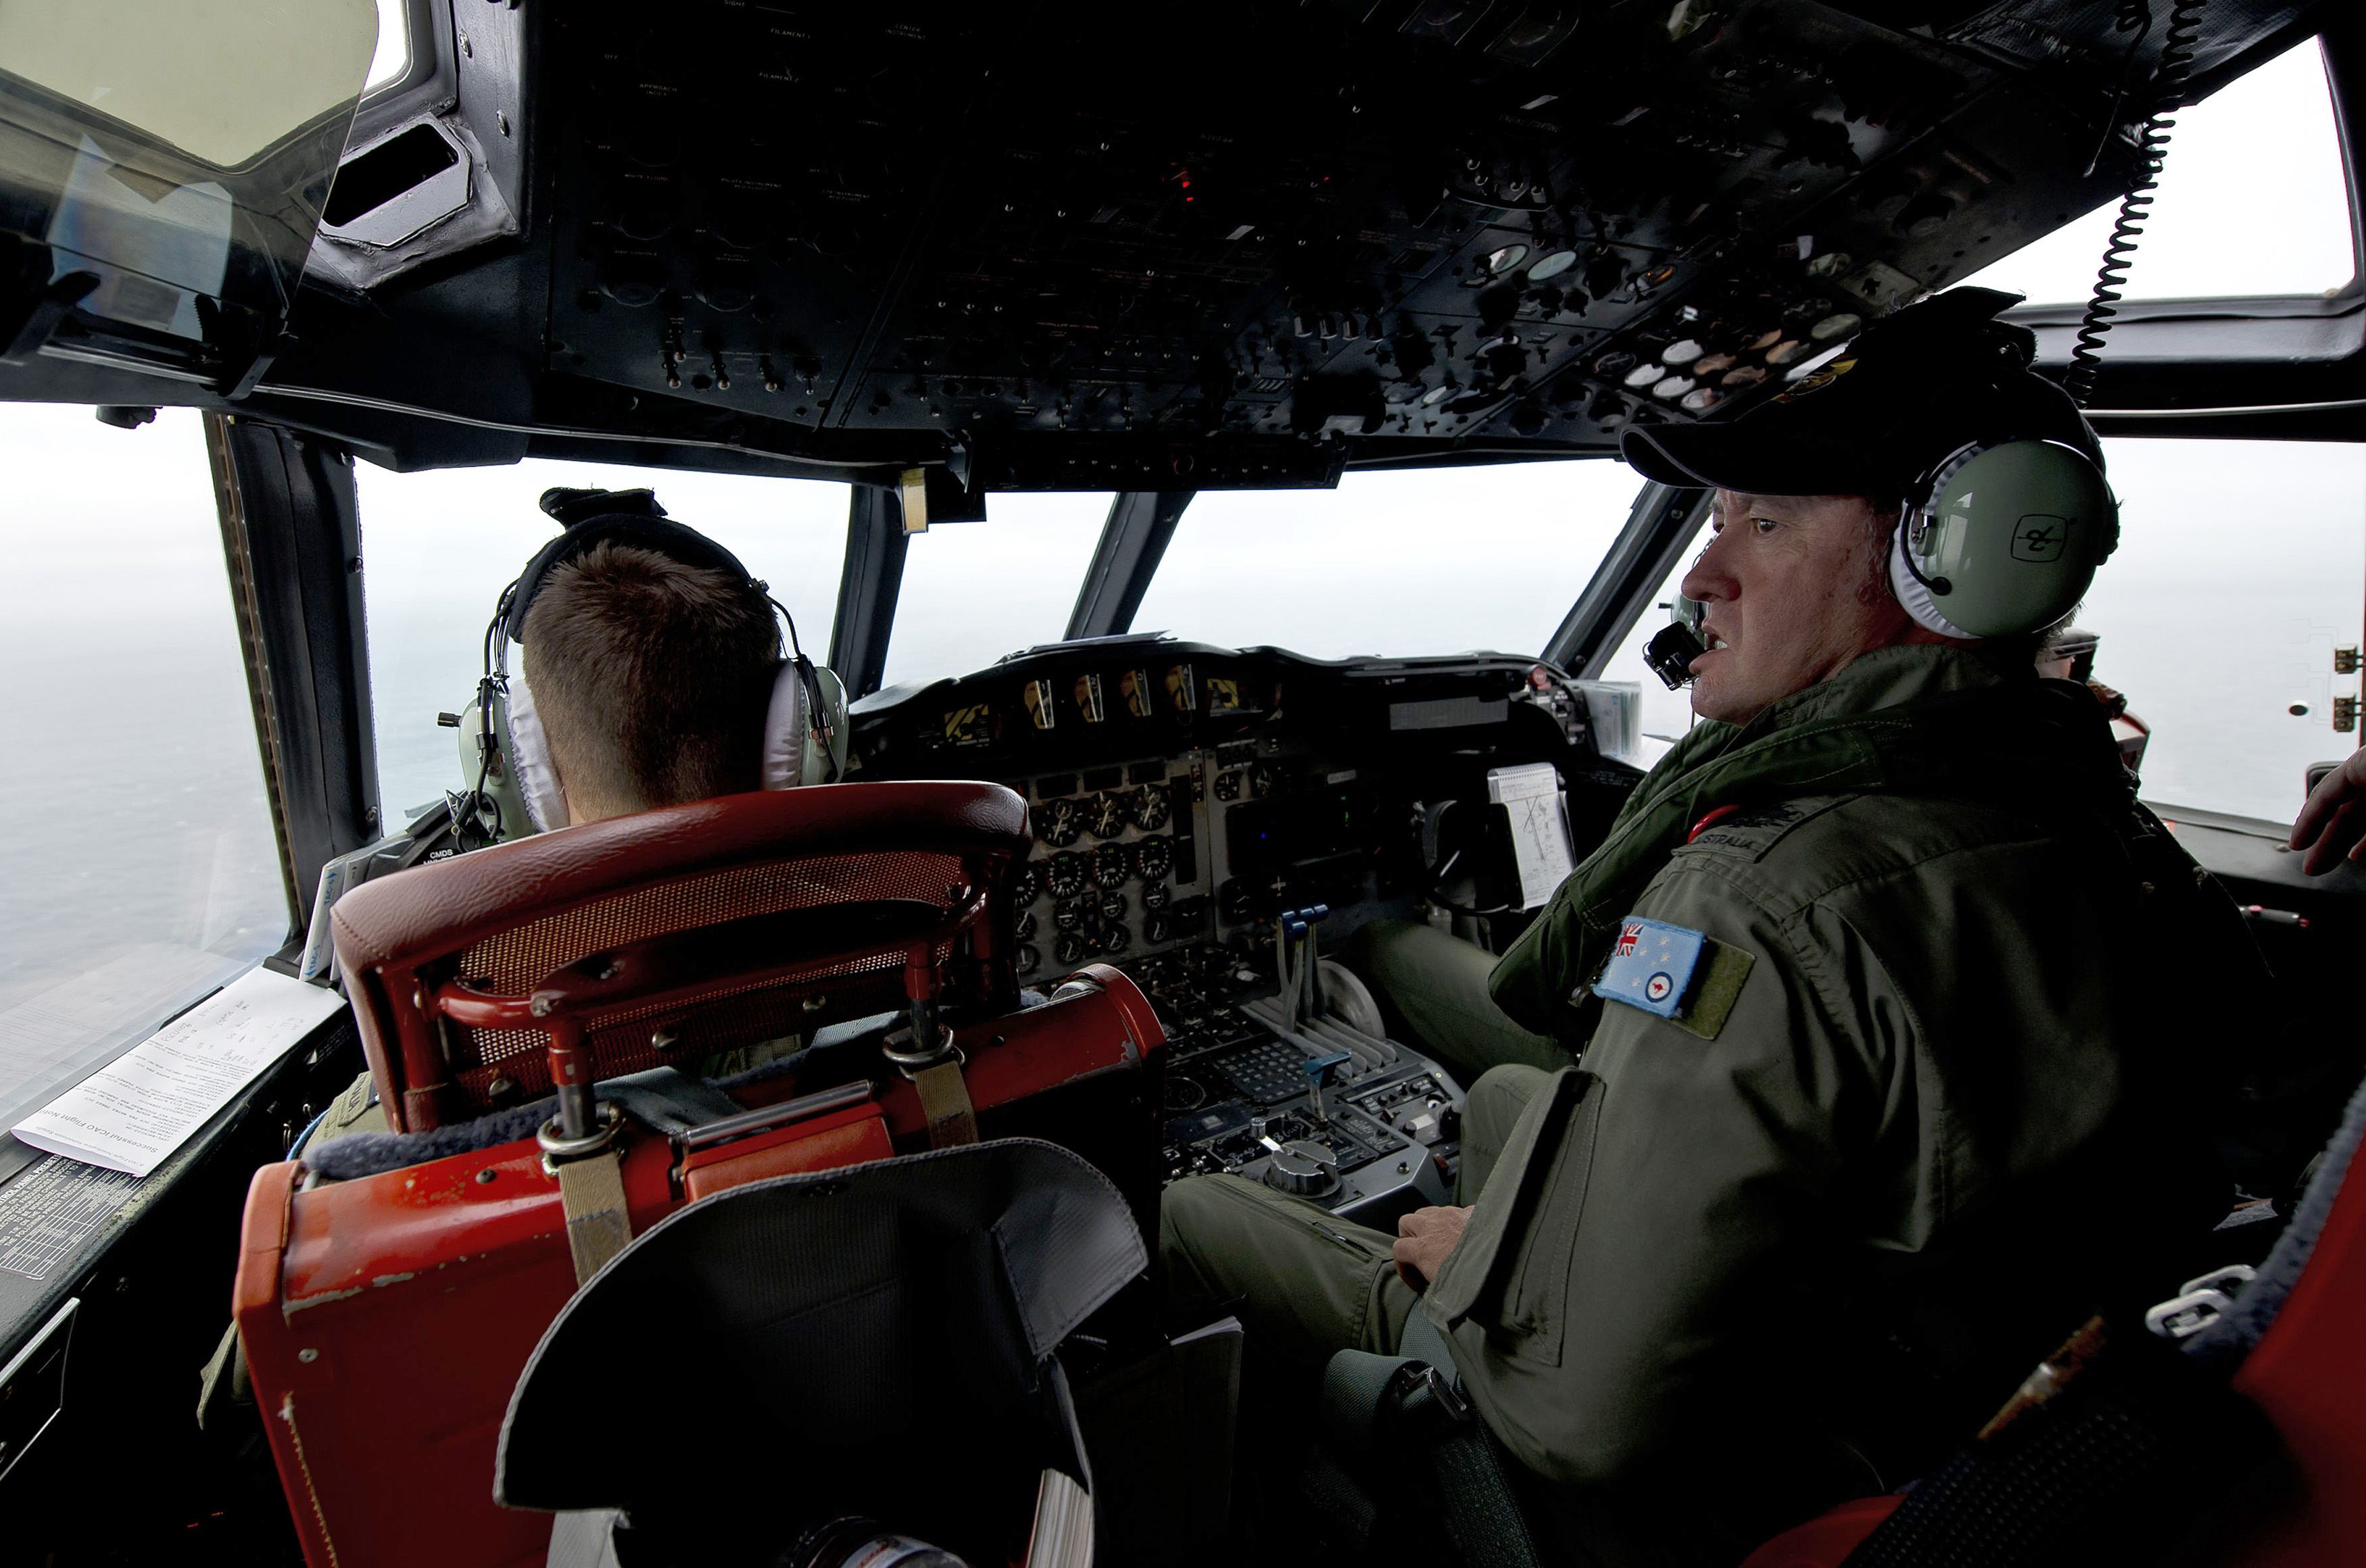 Australia widens MH370 search area as hunt ramps up